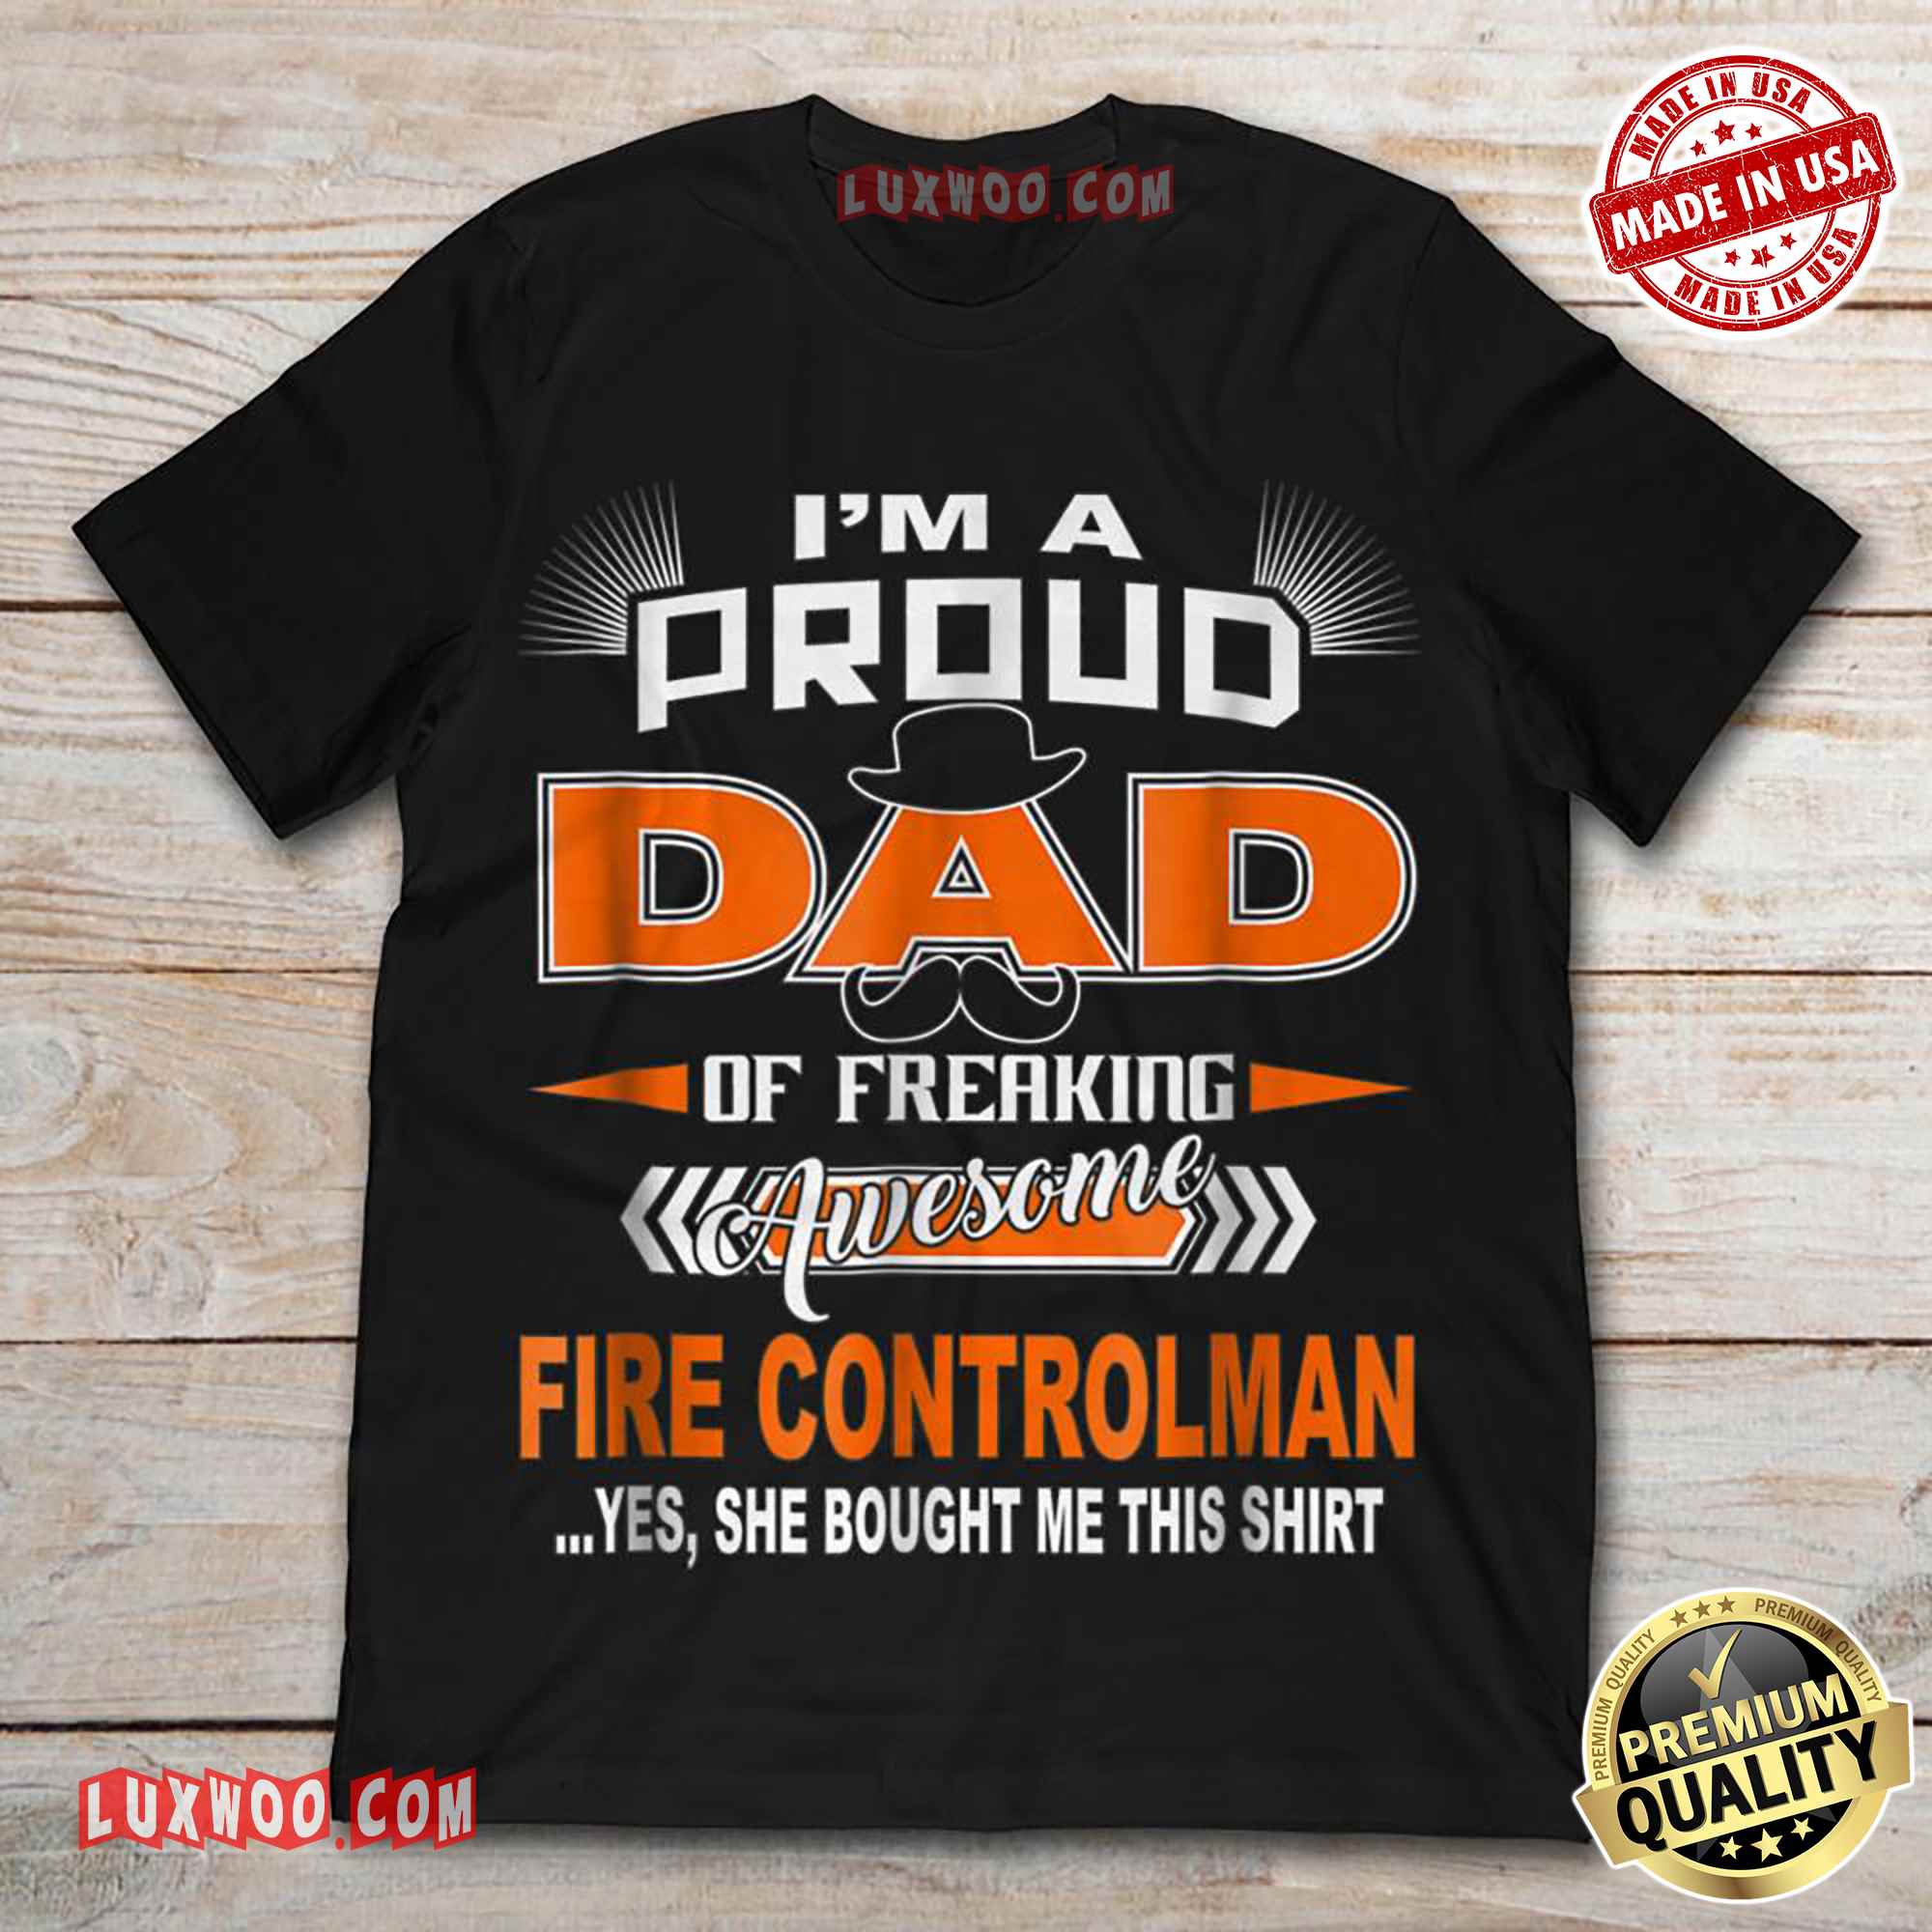 Im A Proud Dad Of Freaking Awesome Fire Controlman Yes She Bought Me This Shirt Tshirt